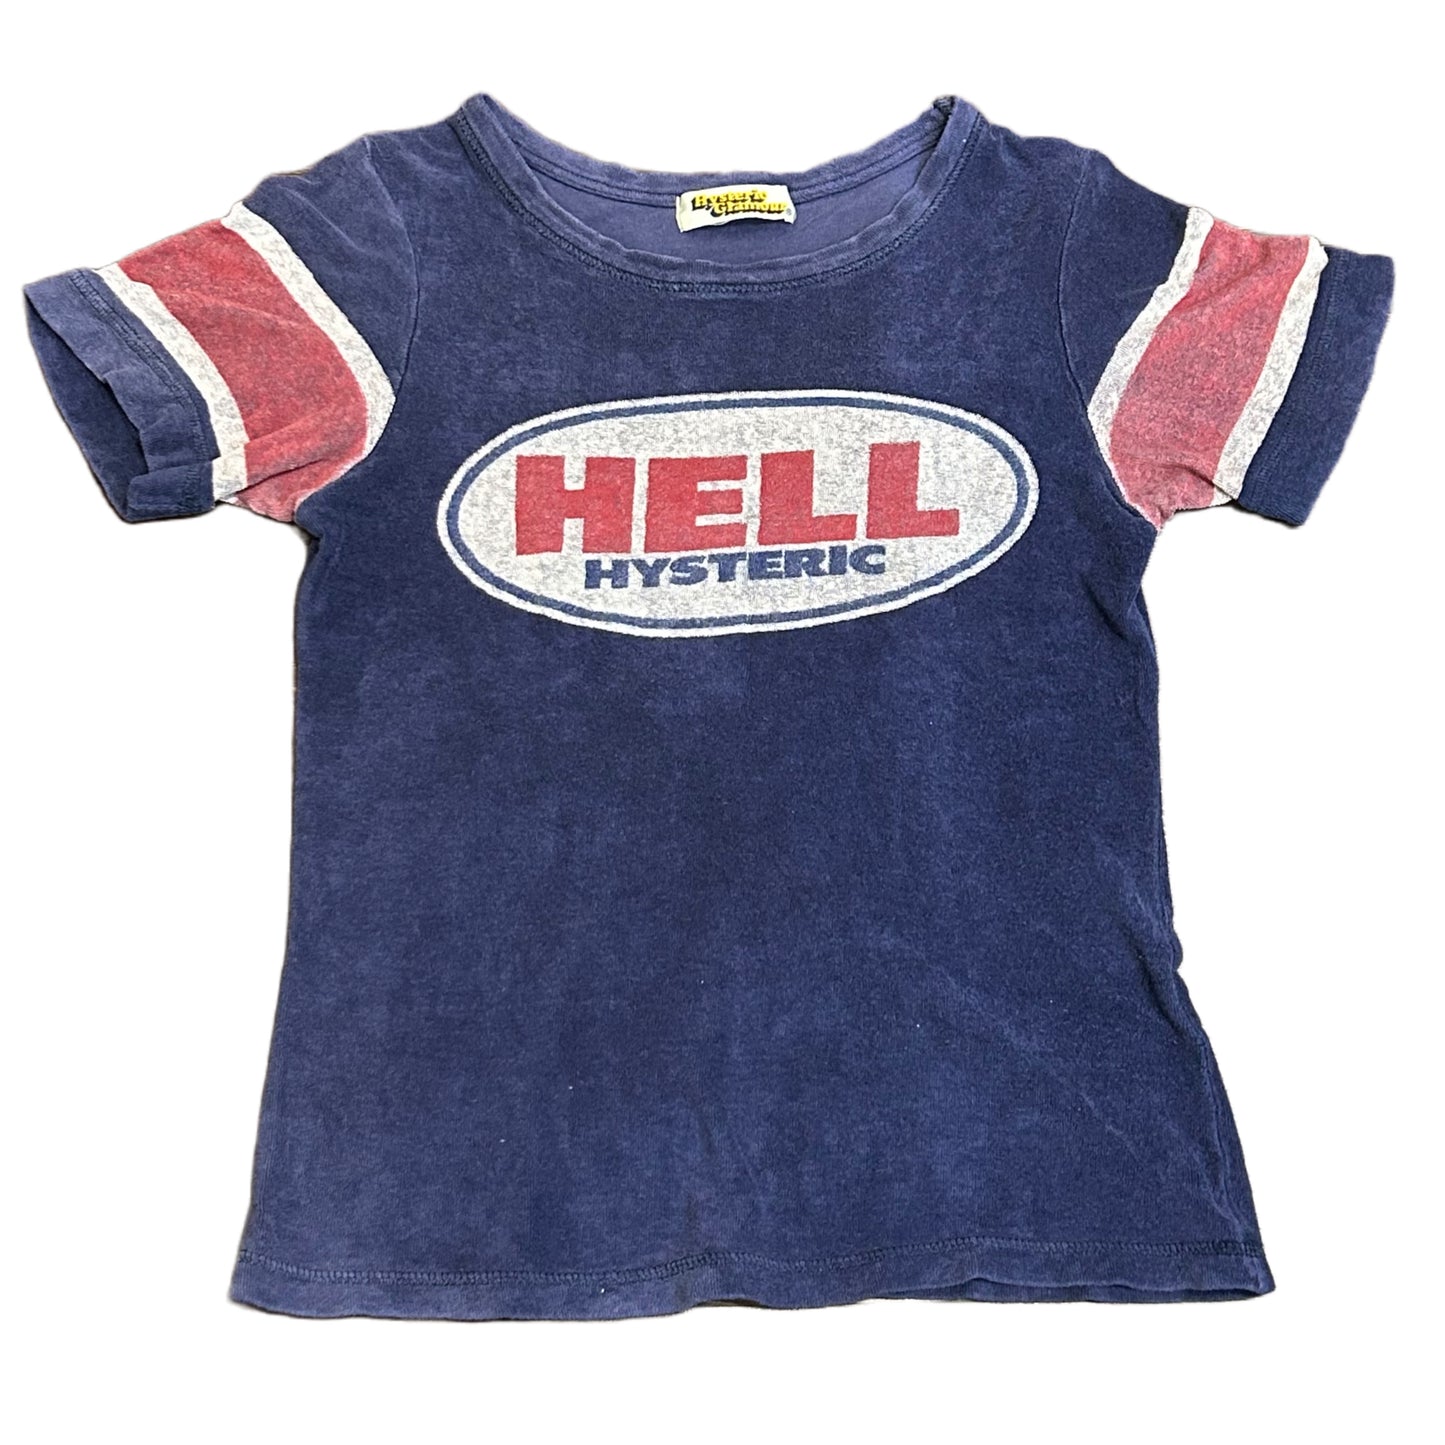 Hell Hysteric top